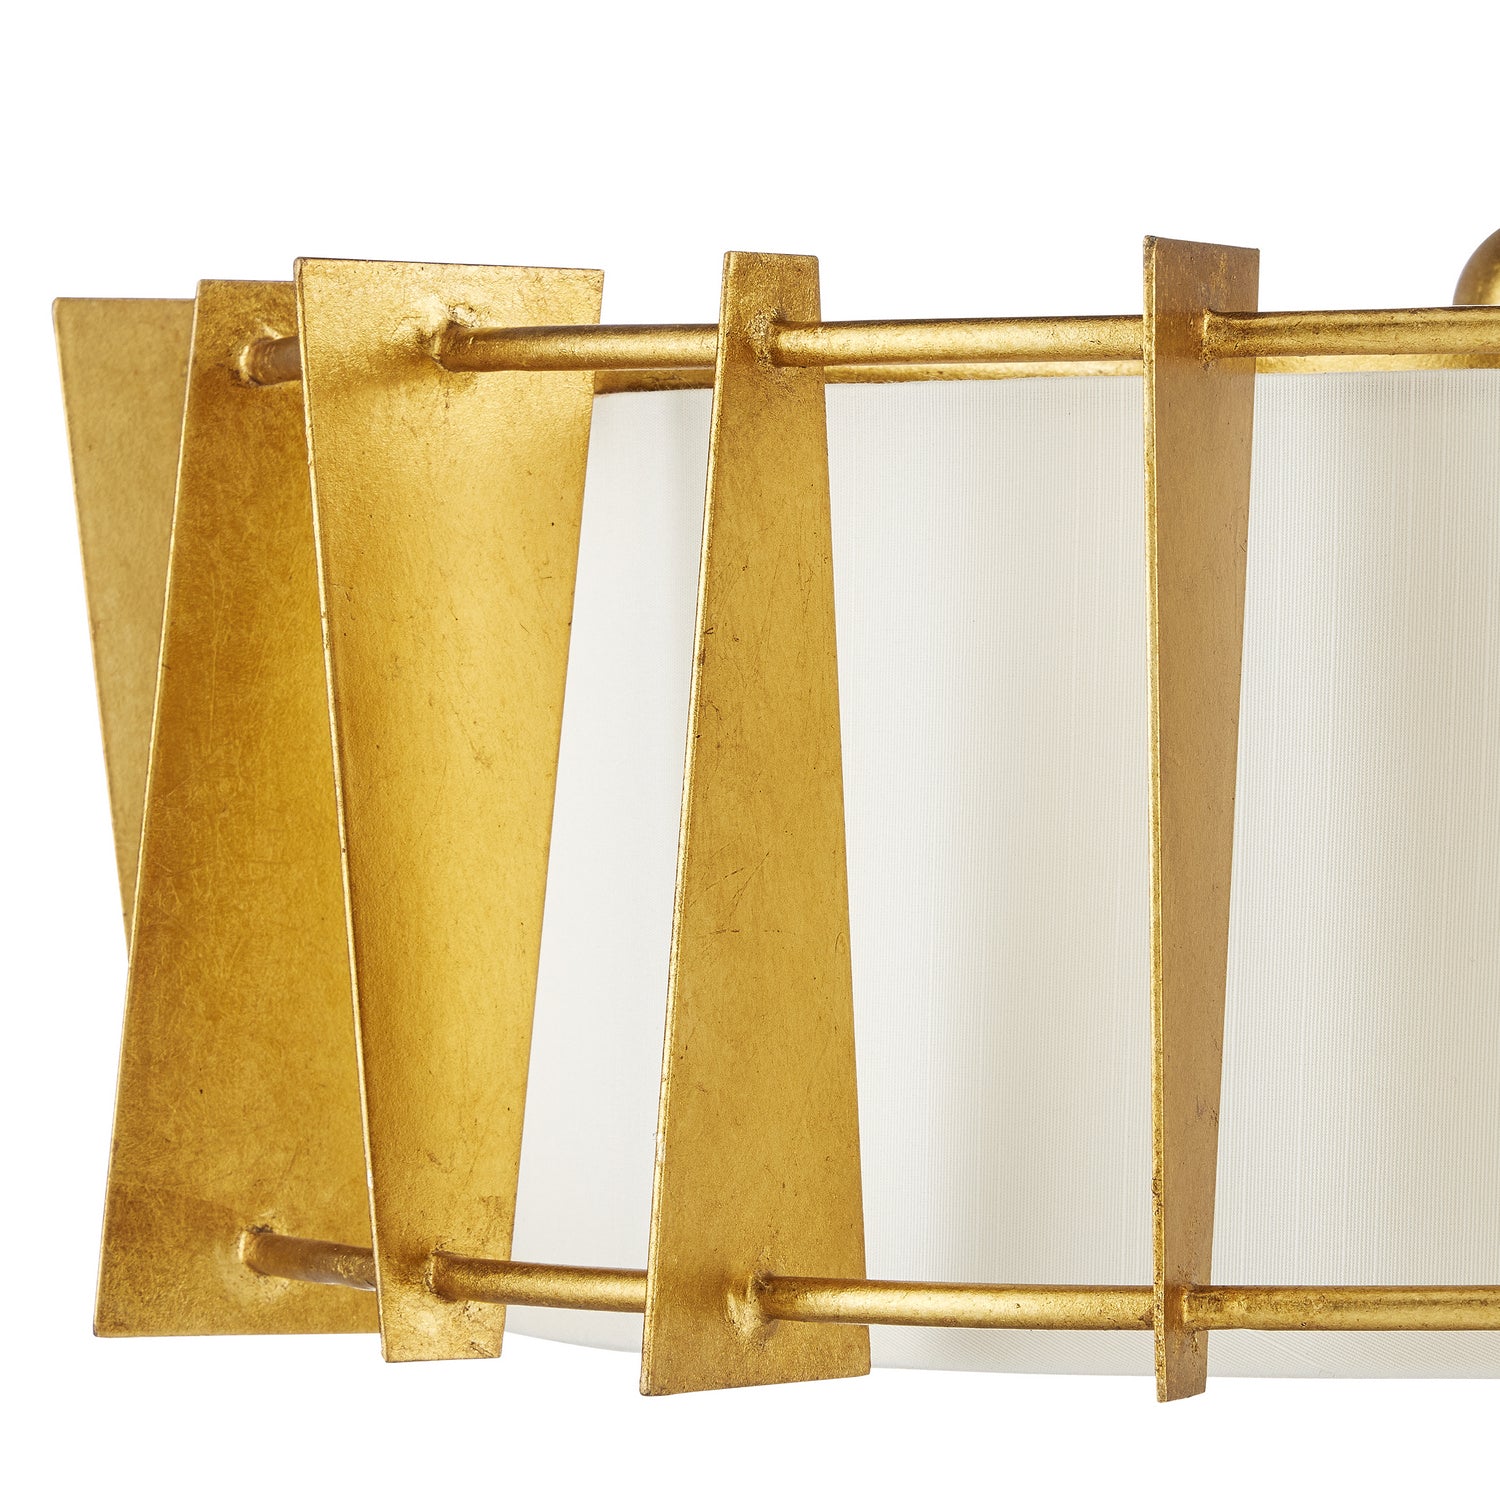 One Light Semi-Flush Mount from the Berwick collection in Contemporary Gold Leaf finish